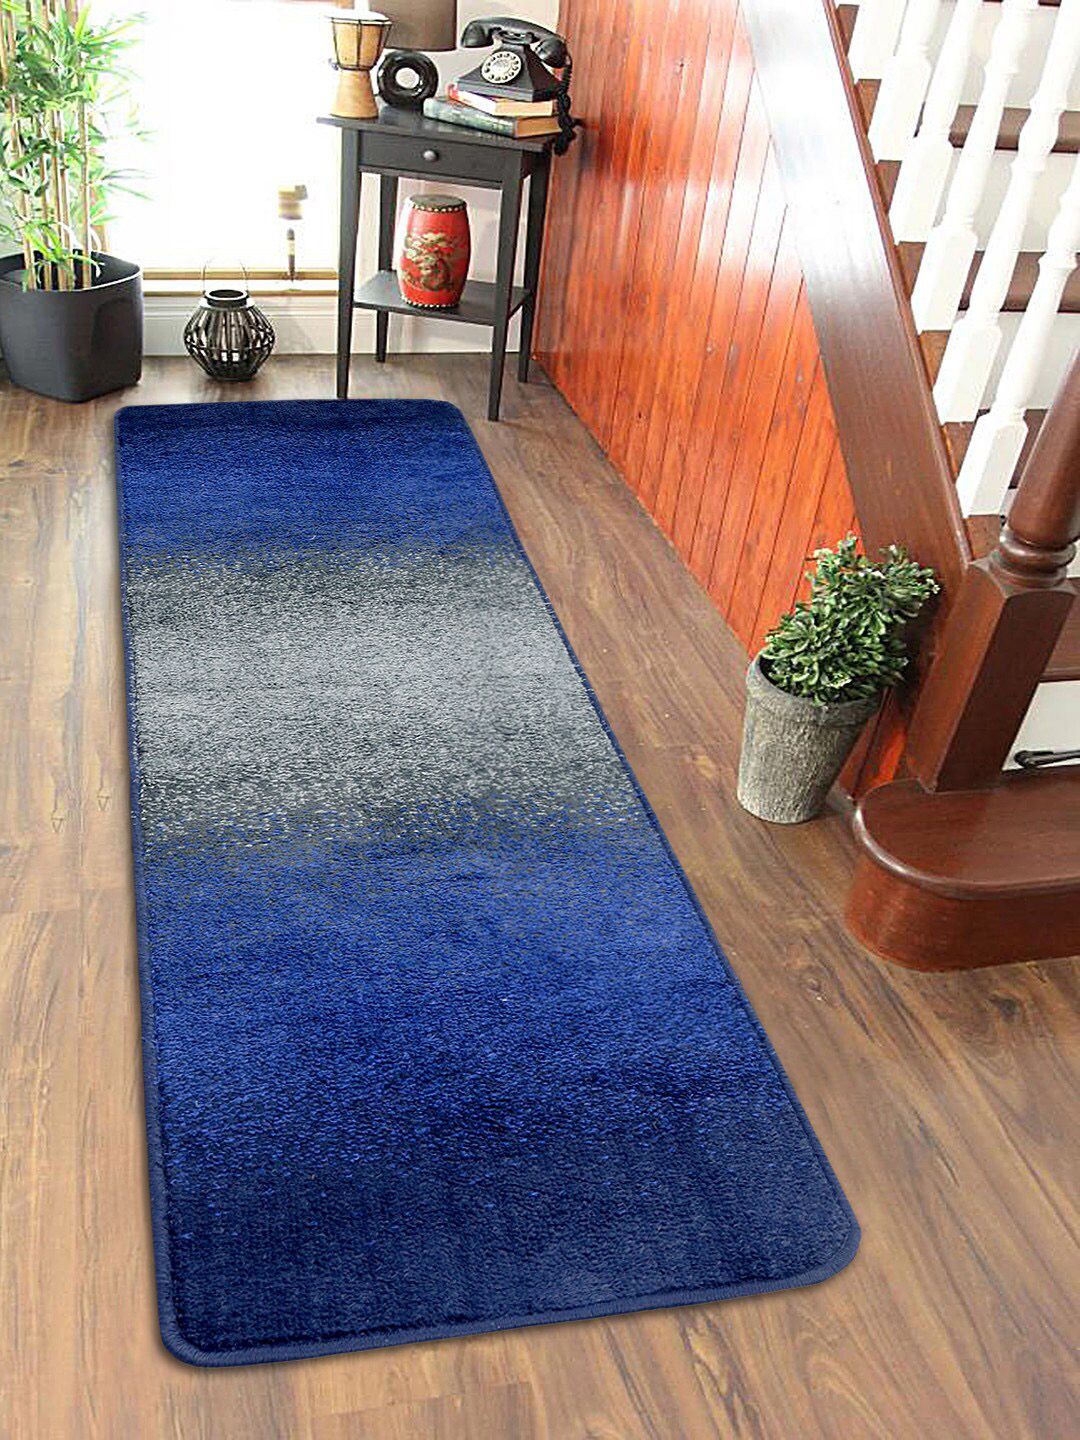 Saral Home Blue & Grey Abstract Aeon Anti-Skid Floor Runner Price in India